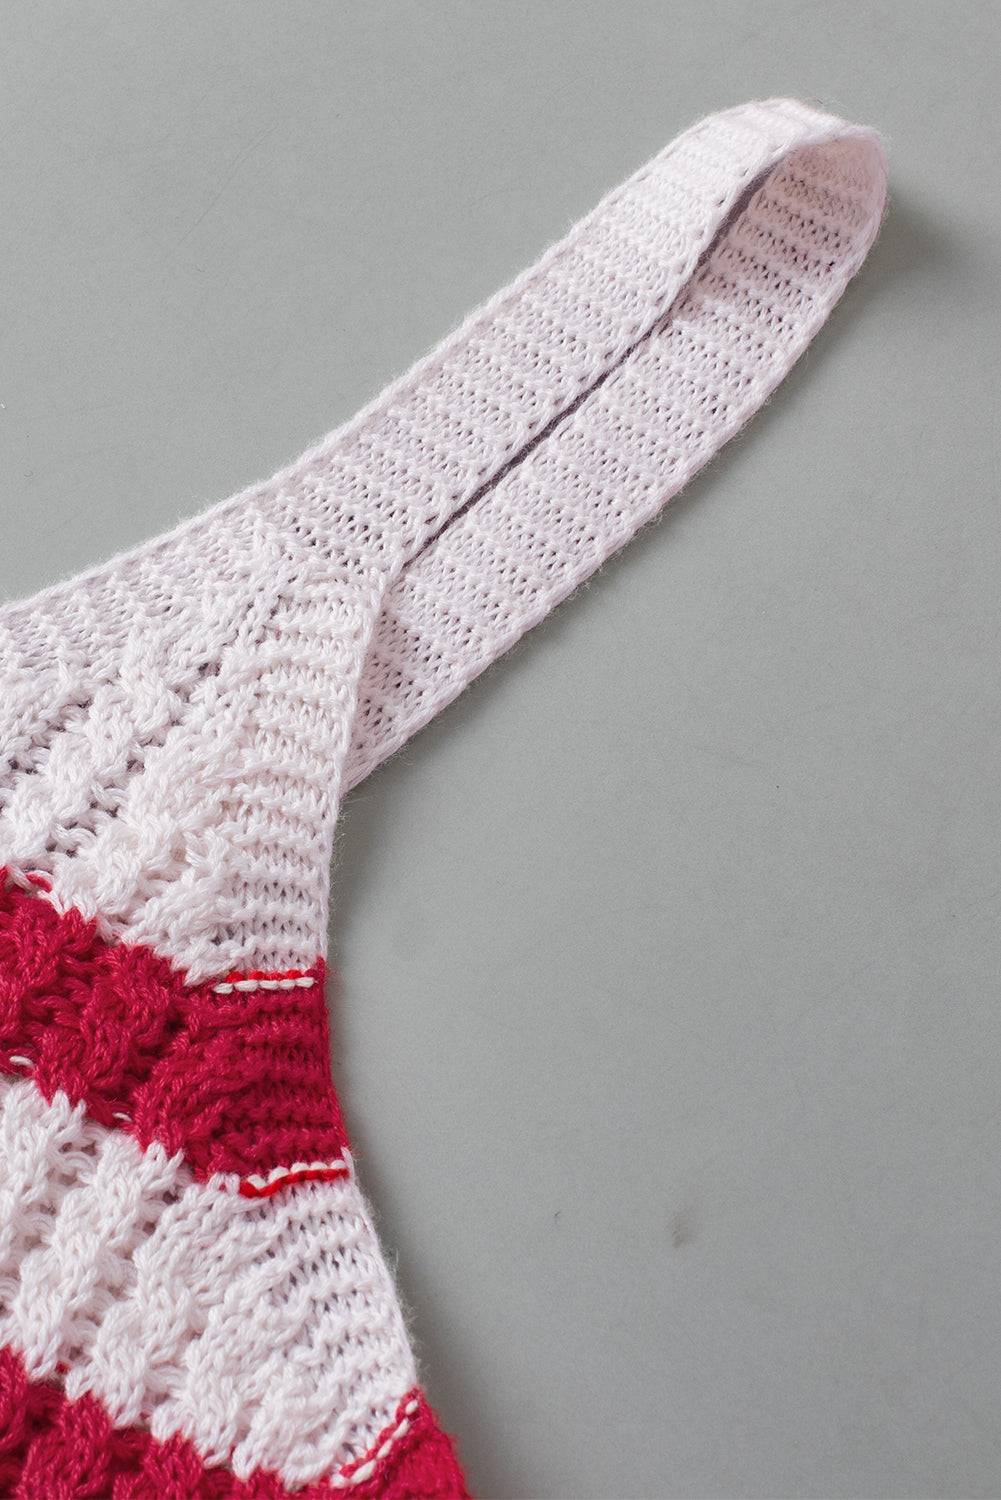 a red and white knitted tie laying on top of a table